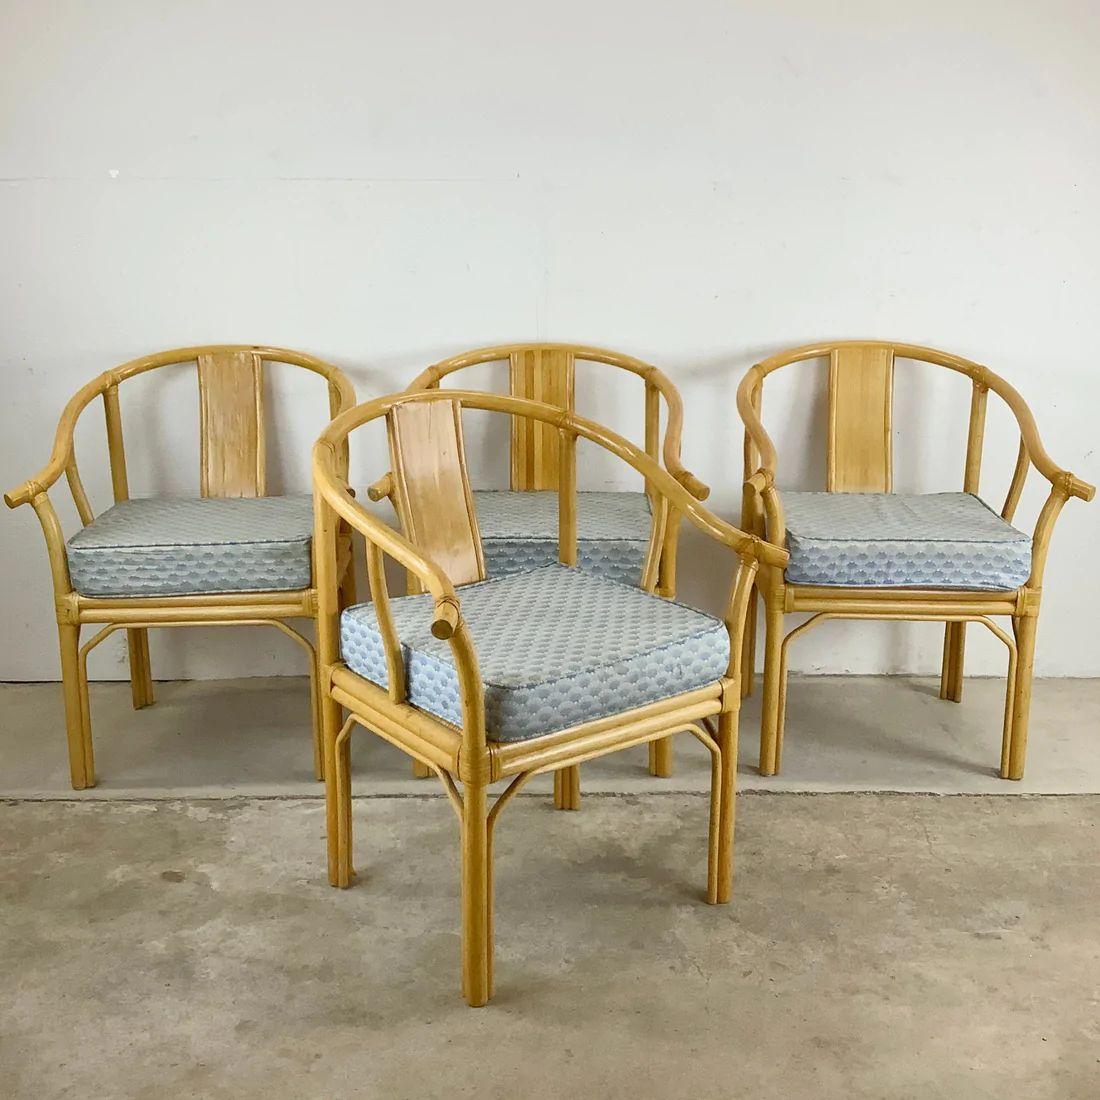 This sturdy and stylish set of four vintage modern armchairs feature bamboo frames with rattan seats and chinoiserie style design. Comfortable proportions and unique boho design make these perfect for regular use in a dining room, kitchen, waiting